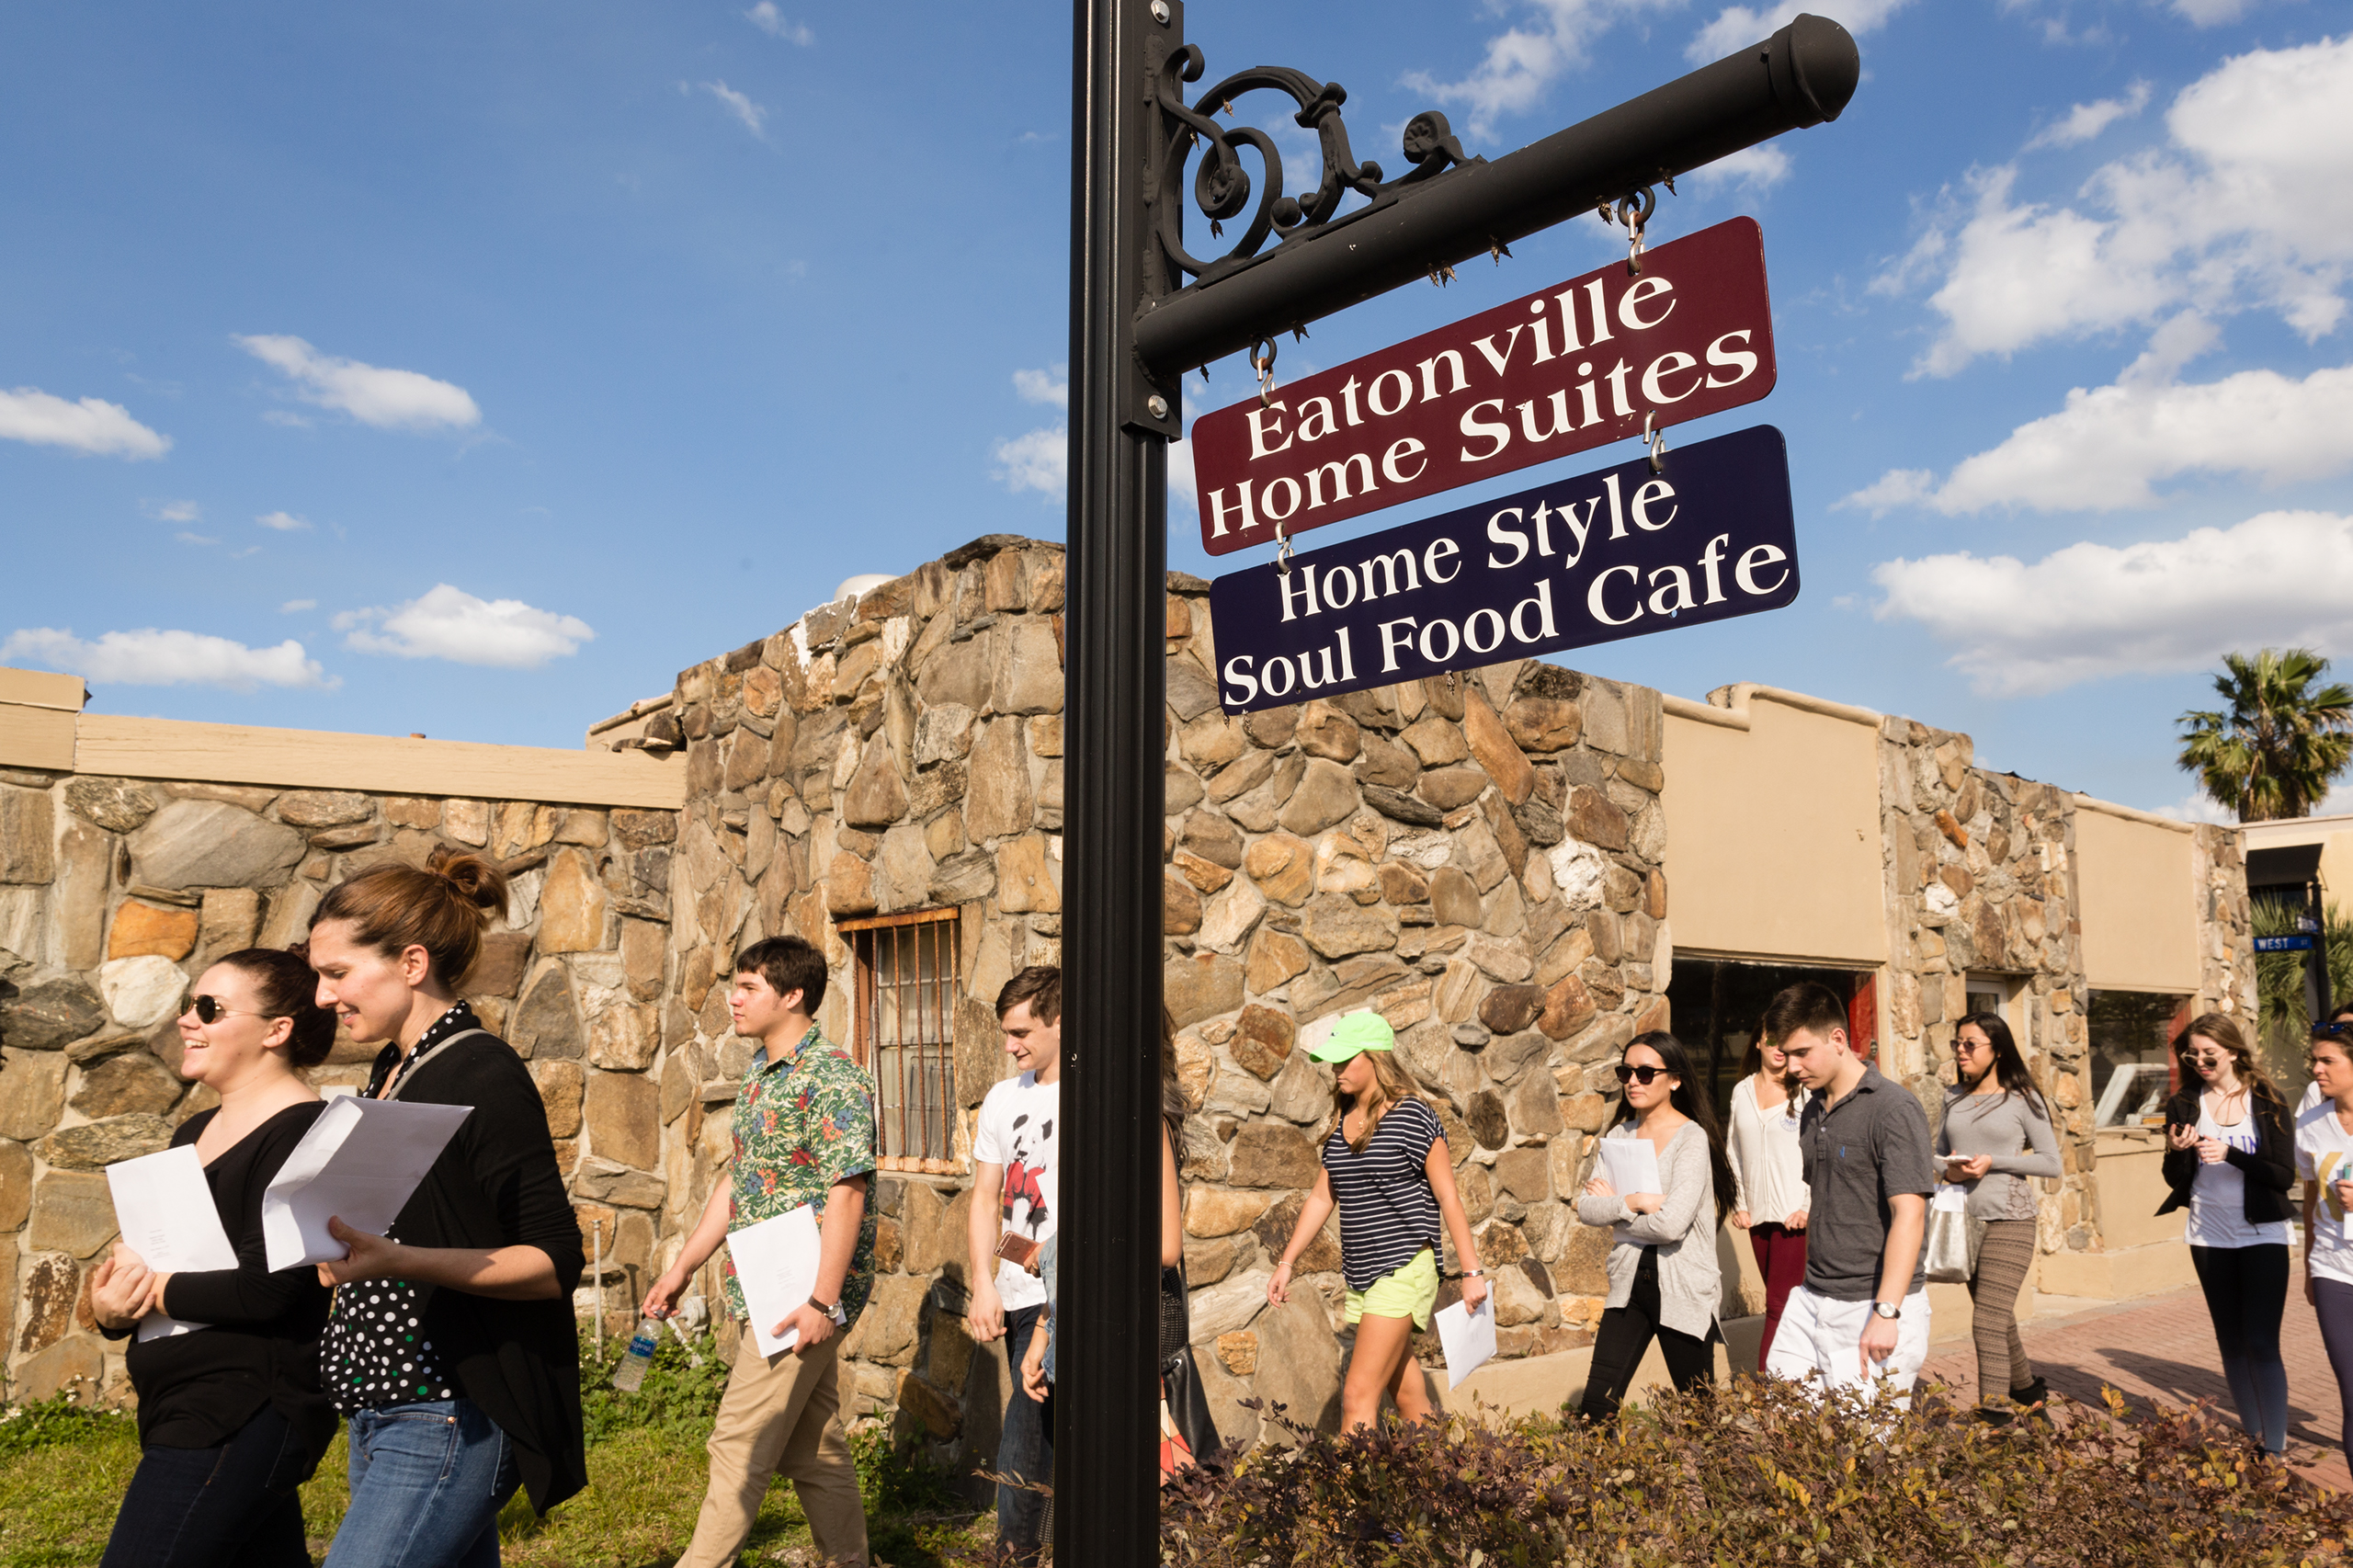 Students visit Eatonville, one of the country’s first self-governing black communities.